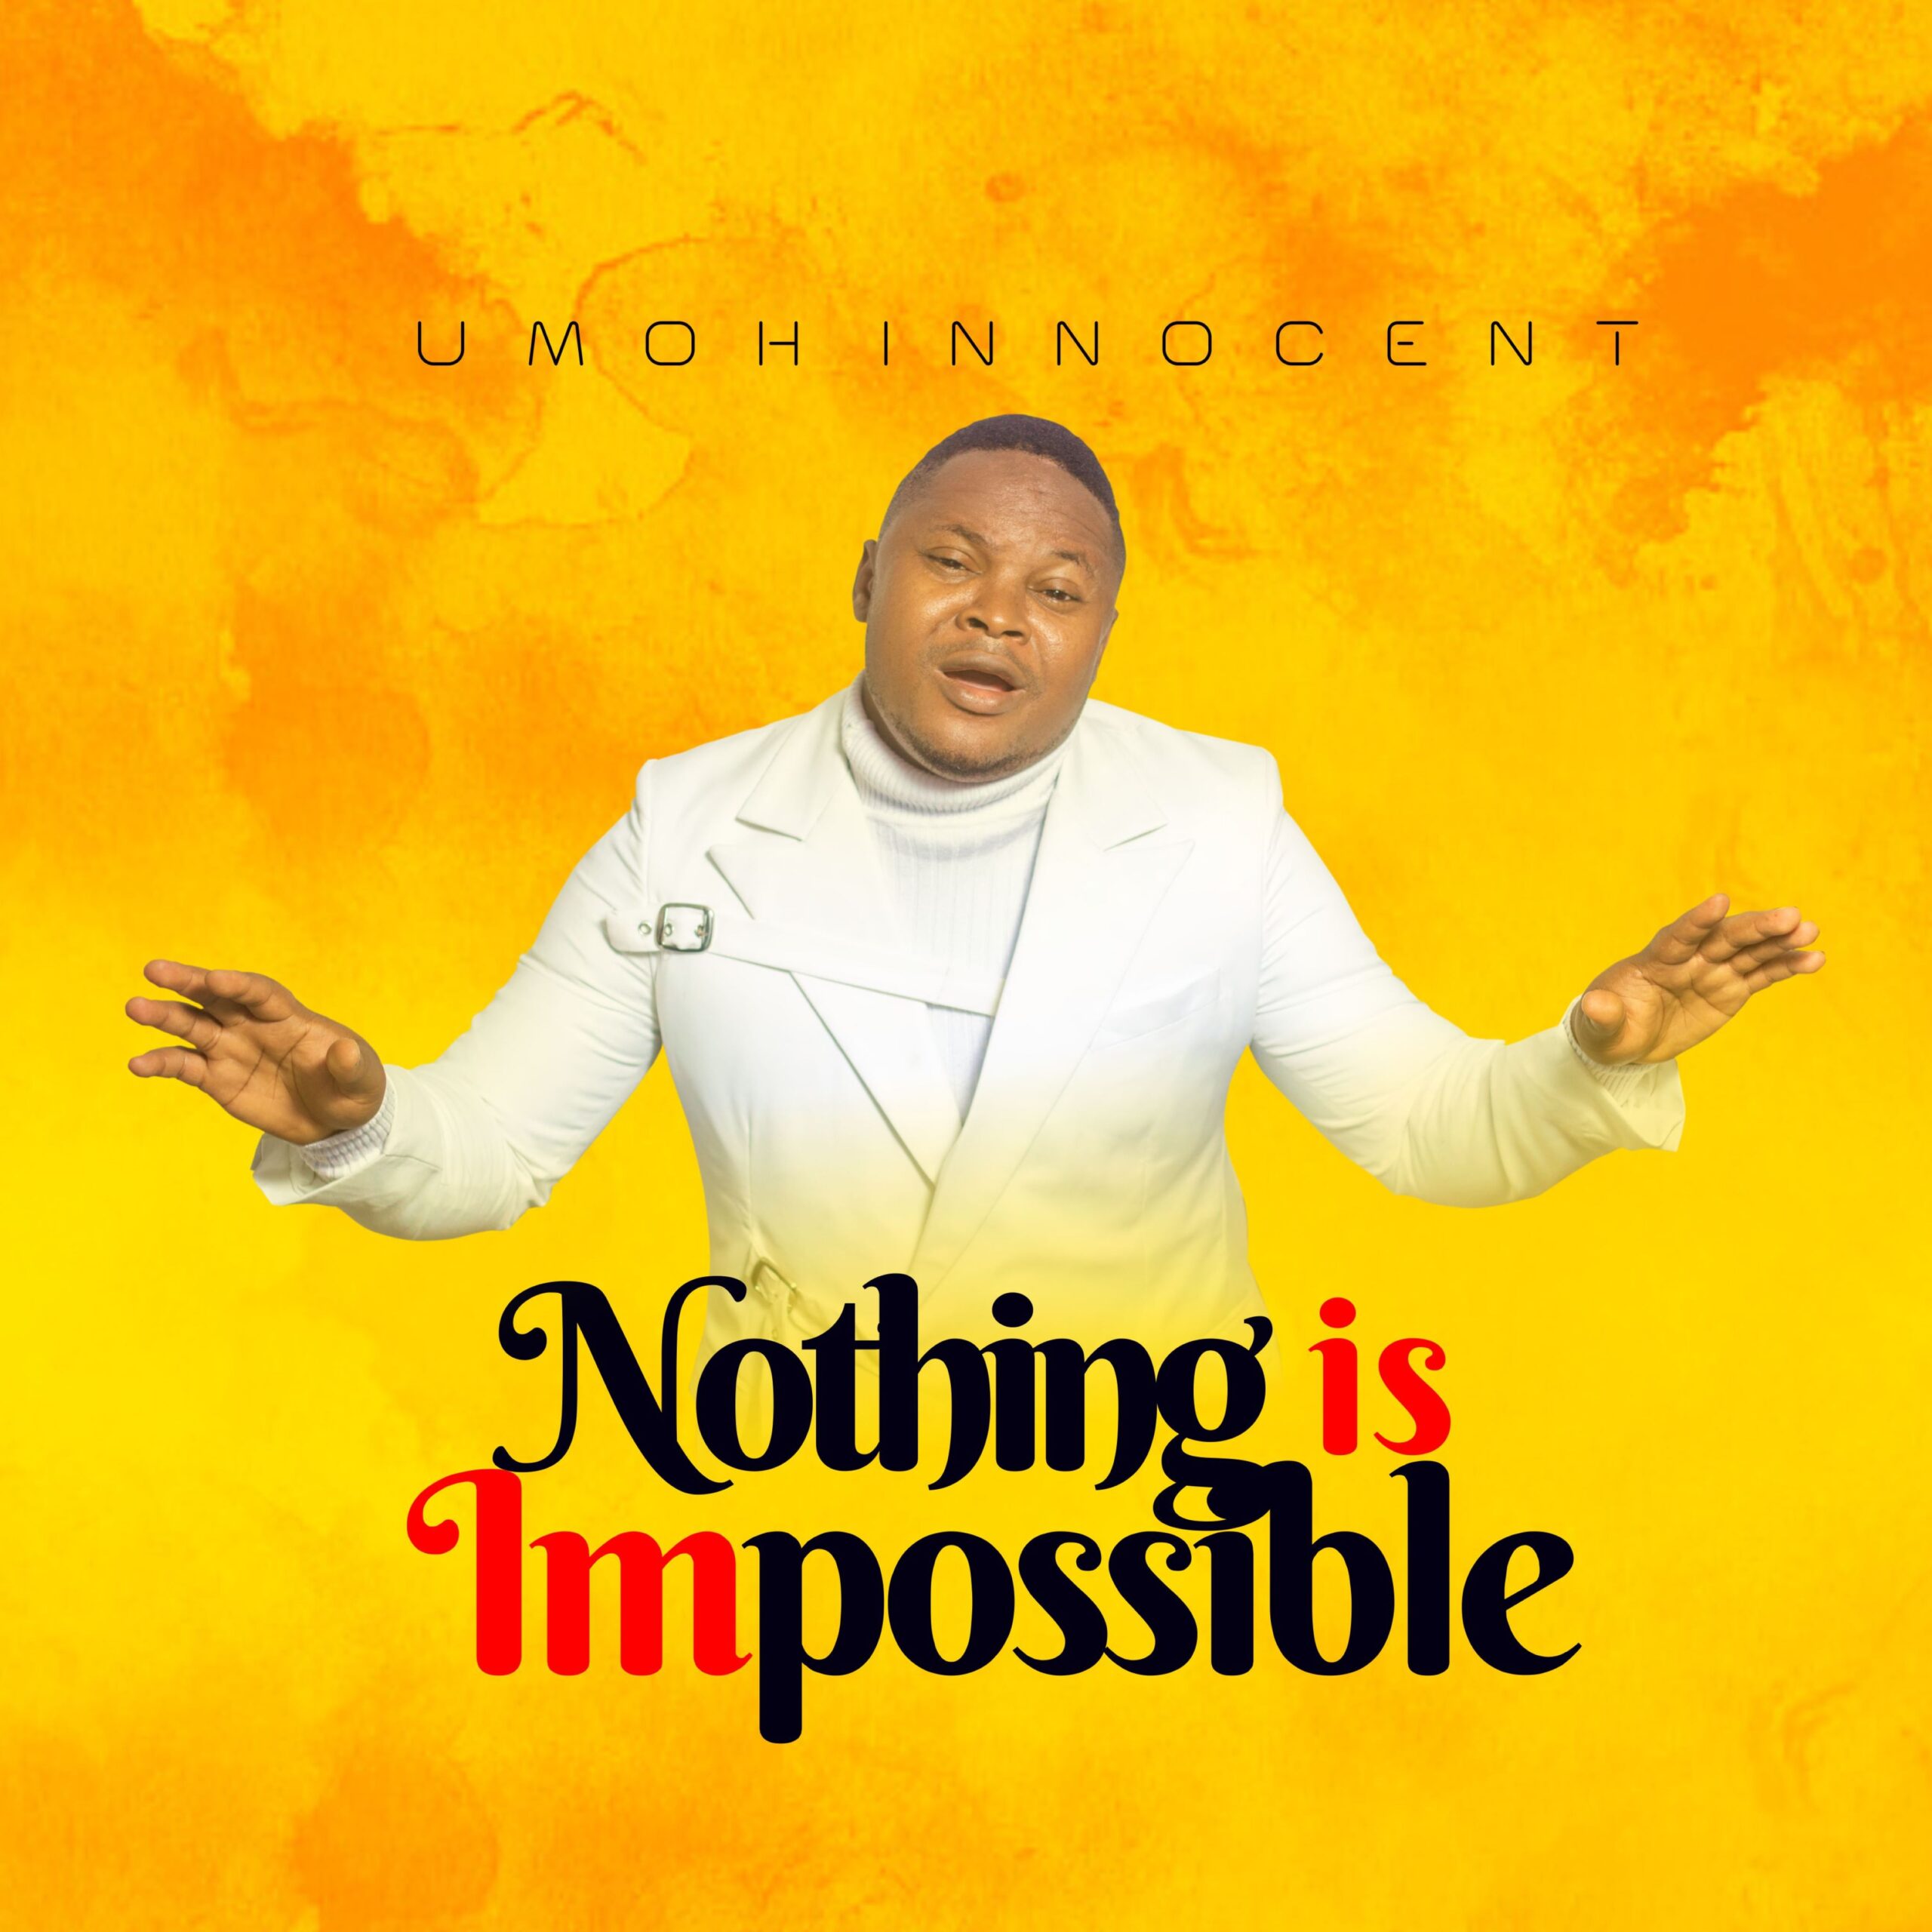 Umoh Innocent- Nothing is impossible